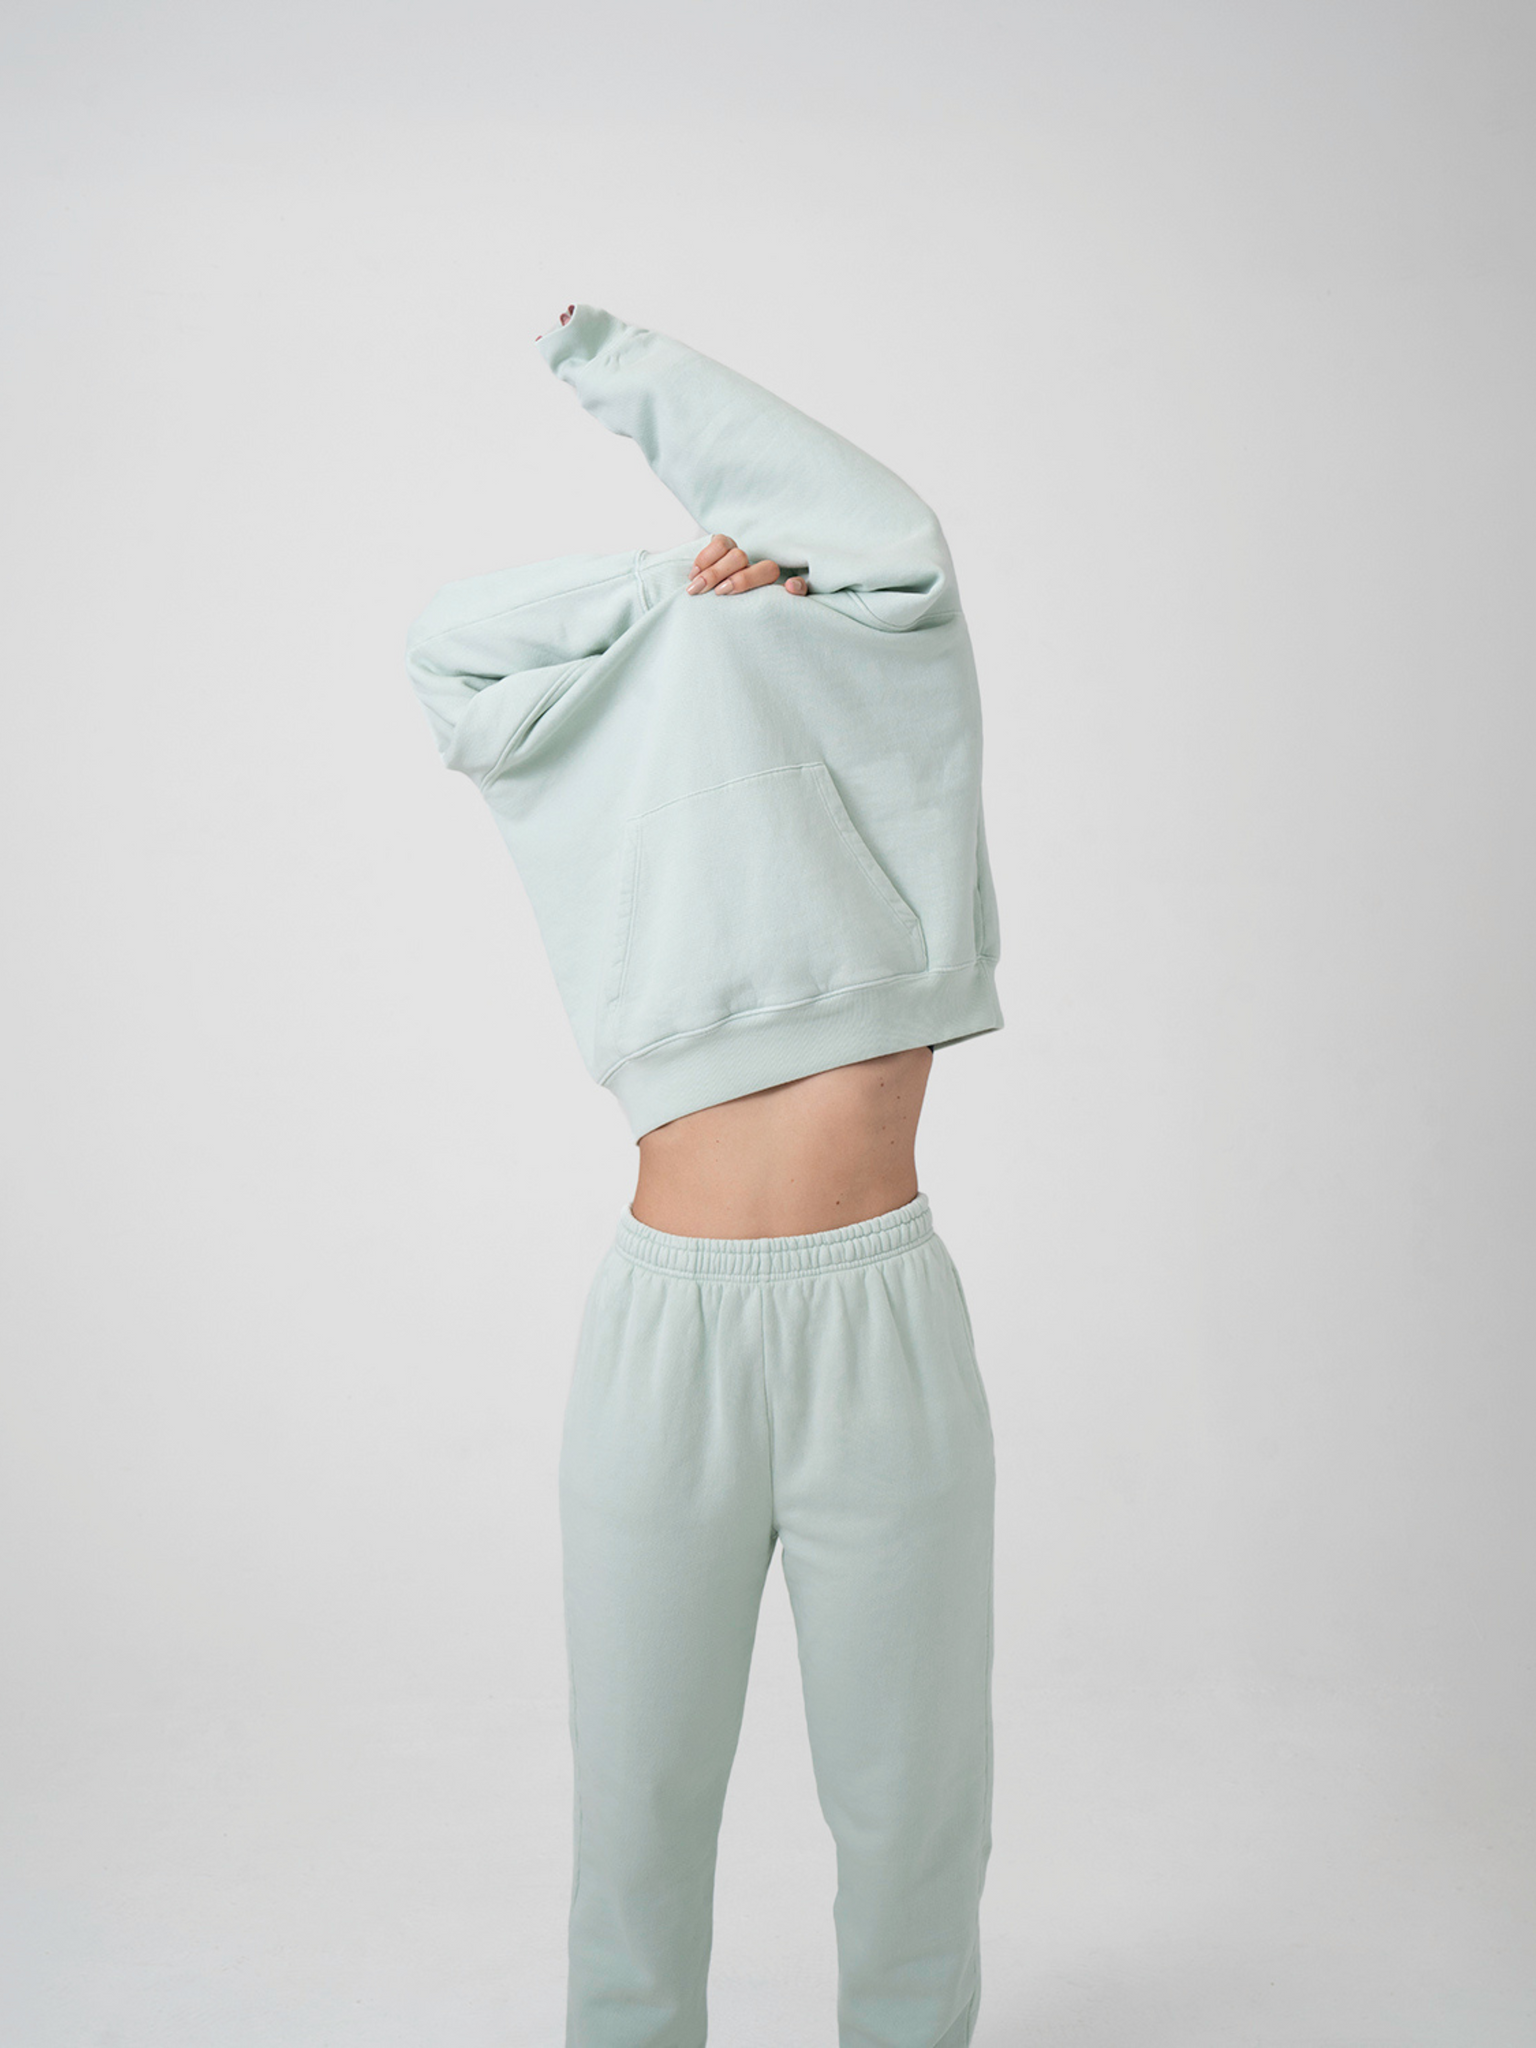 THE HOODIE 2.0 -  MINT GREEN